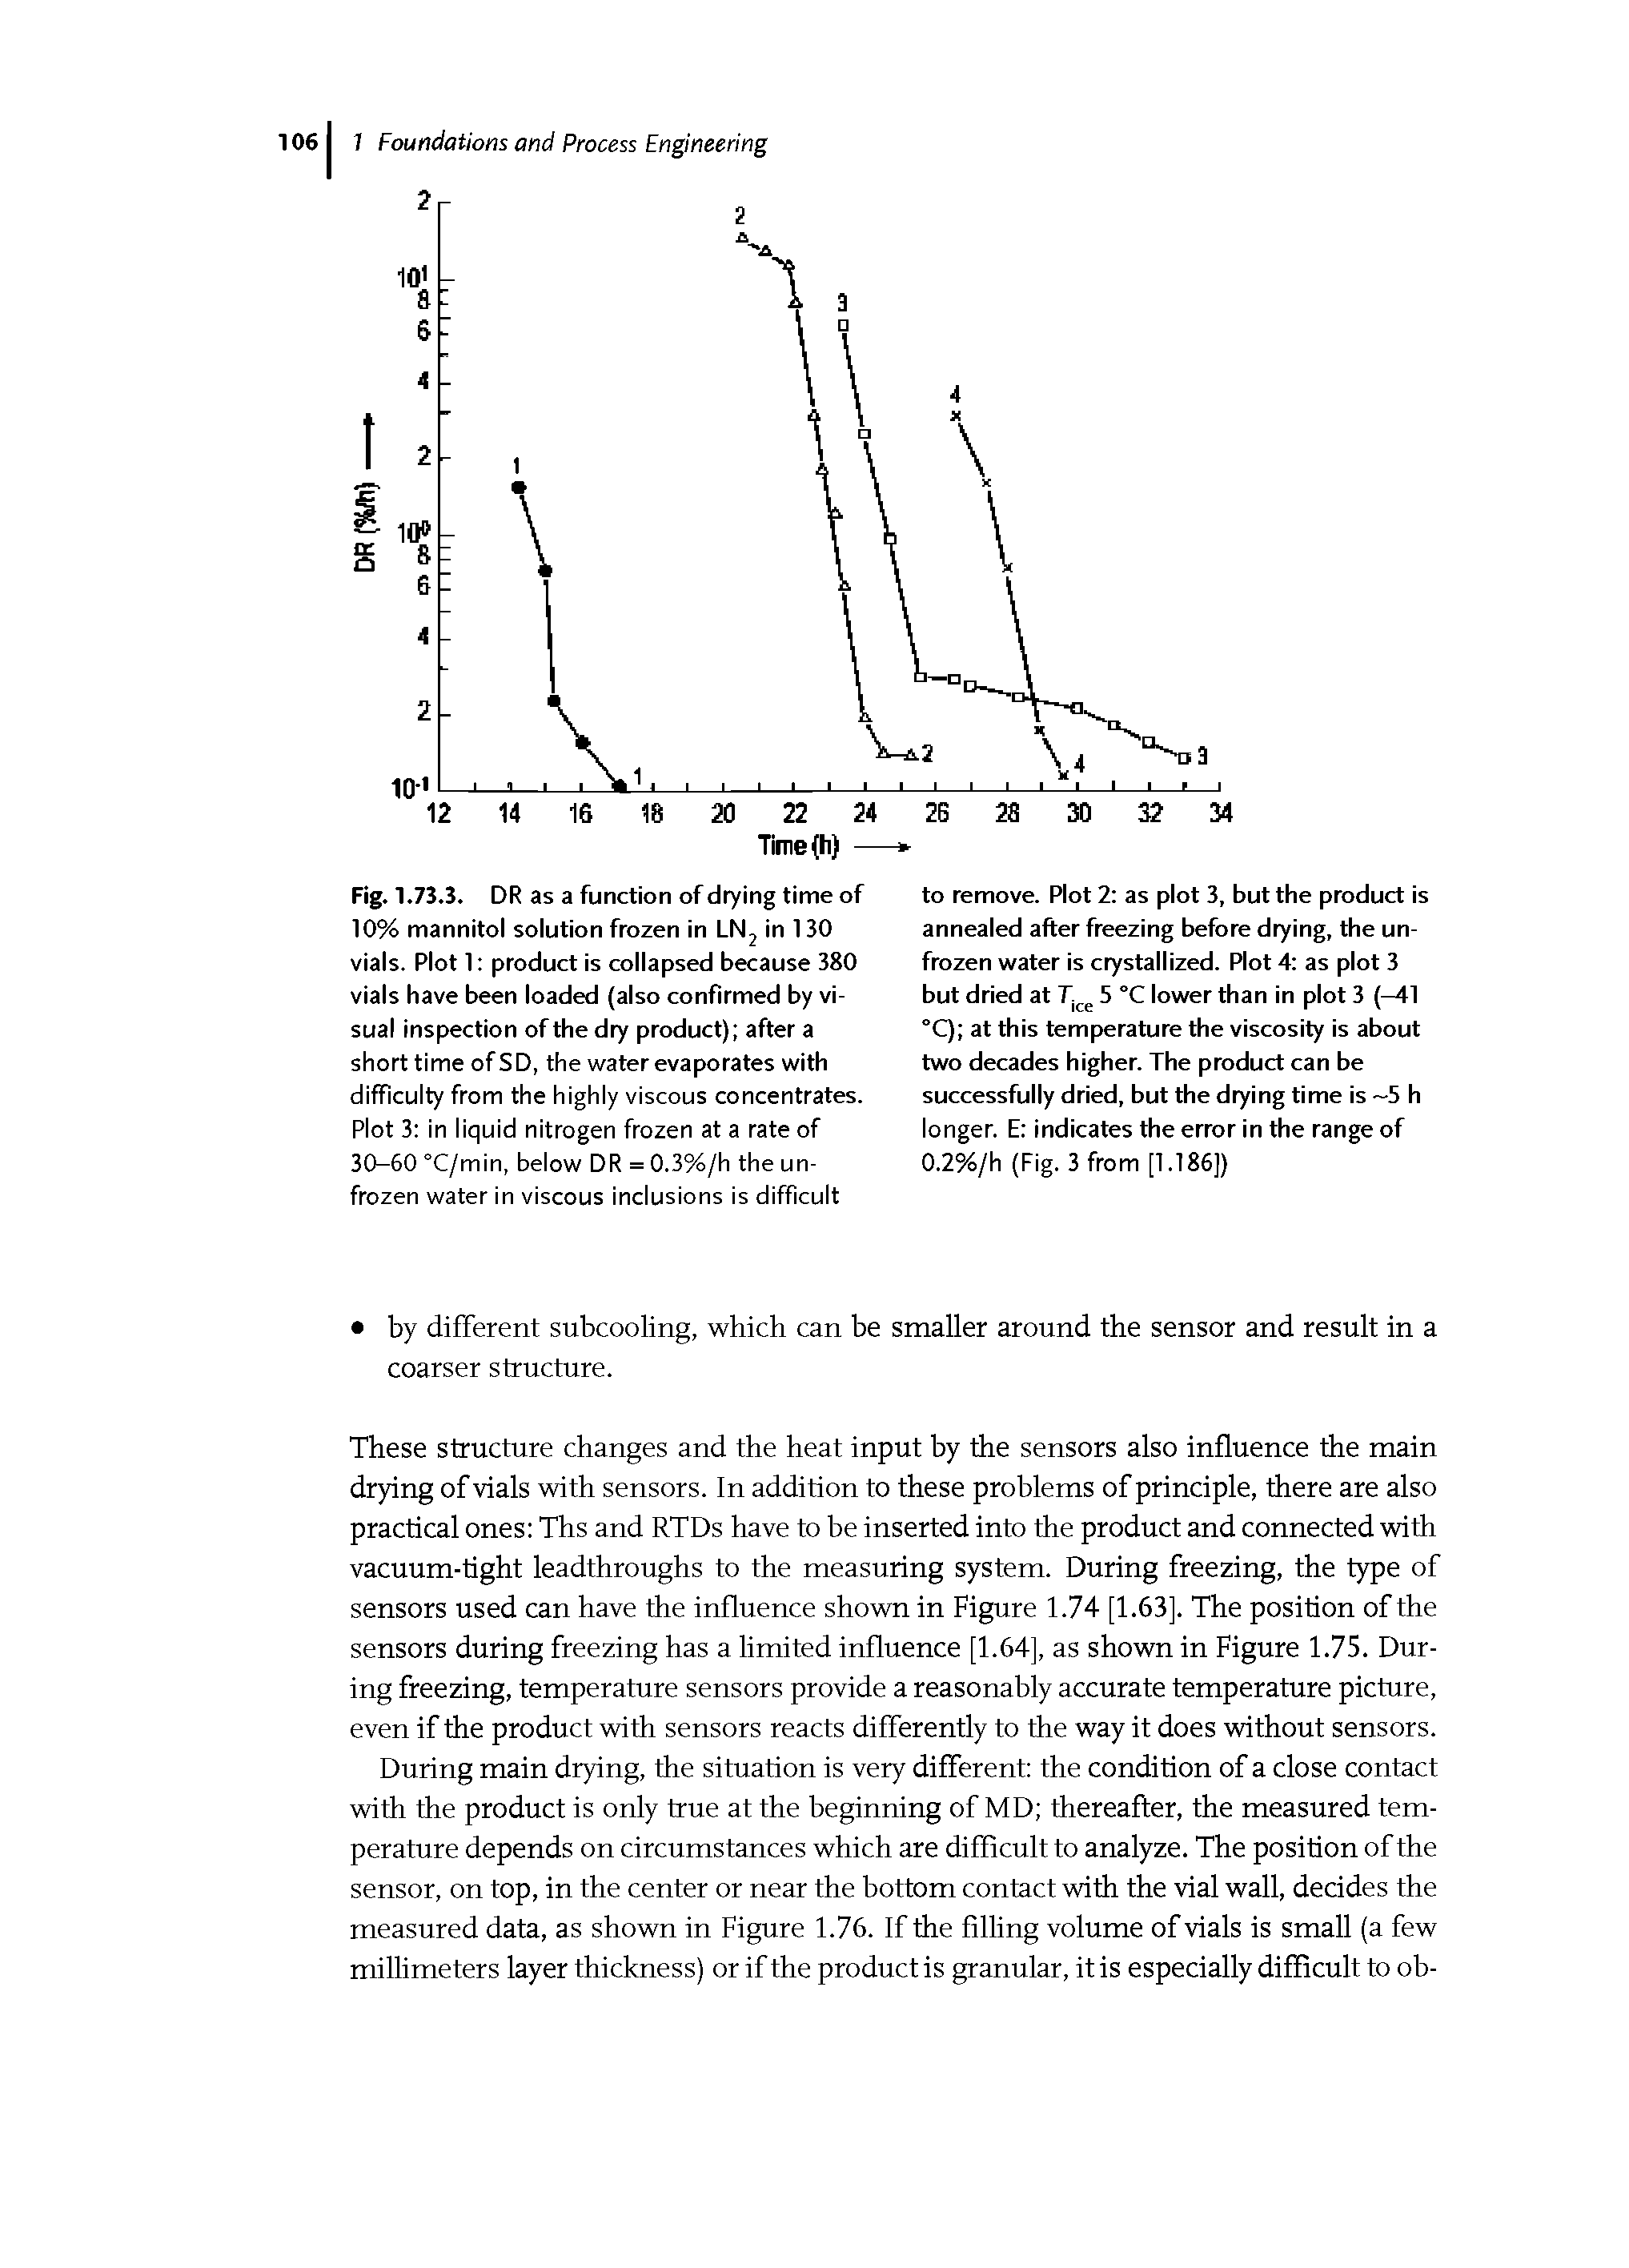 Fig. 1.73.3. DR as a function of drying time of 10% mannitol solution frozen in LN2 in 130 vials. Plot 1 product is collapsed because 380 vials have been loaded (also confirmed by visual inspection of the dry product) after a short time ofSD, the water evaporates with difficulty from the highly viscous concentrates. Plot 3 in liquid nitrogen frozen at a rate of 30-60 °C/min, below DR = 0.3%/h the unfrozen water in viscous inclusions is difficult...